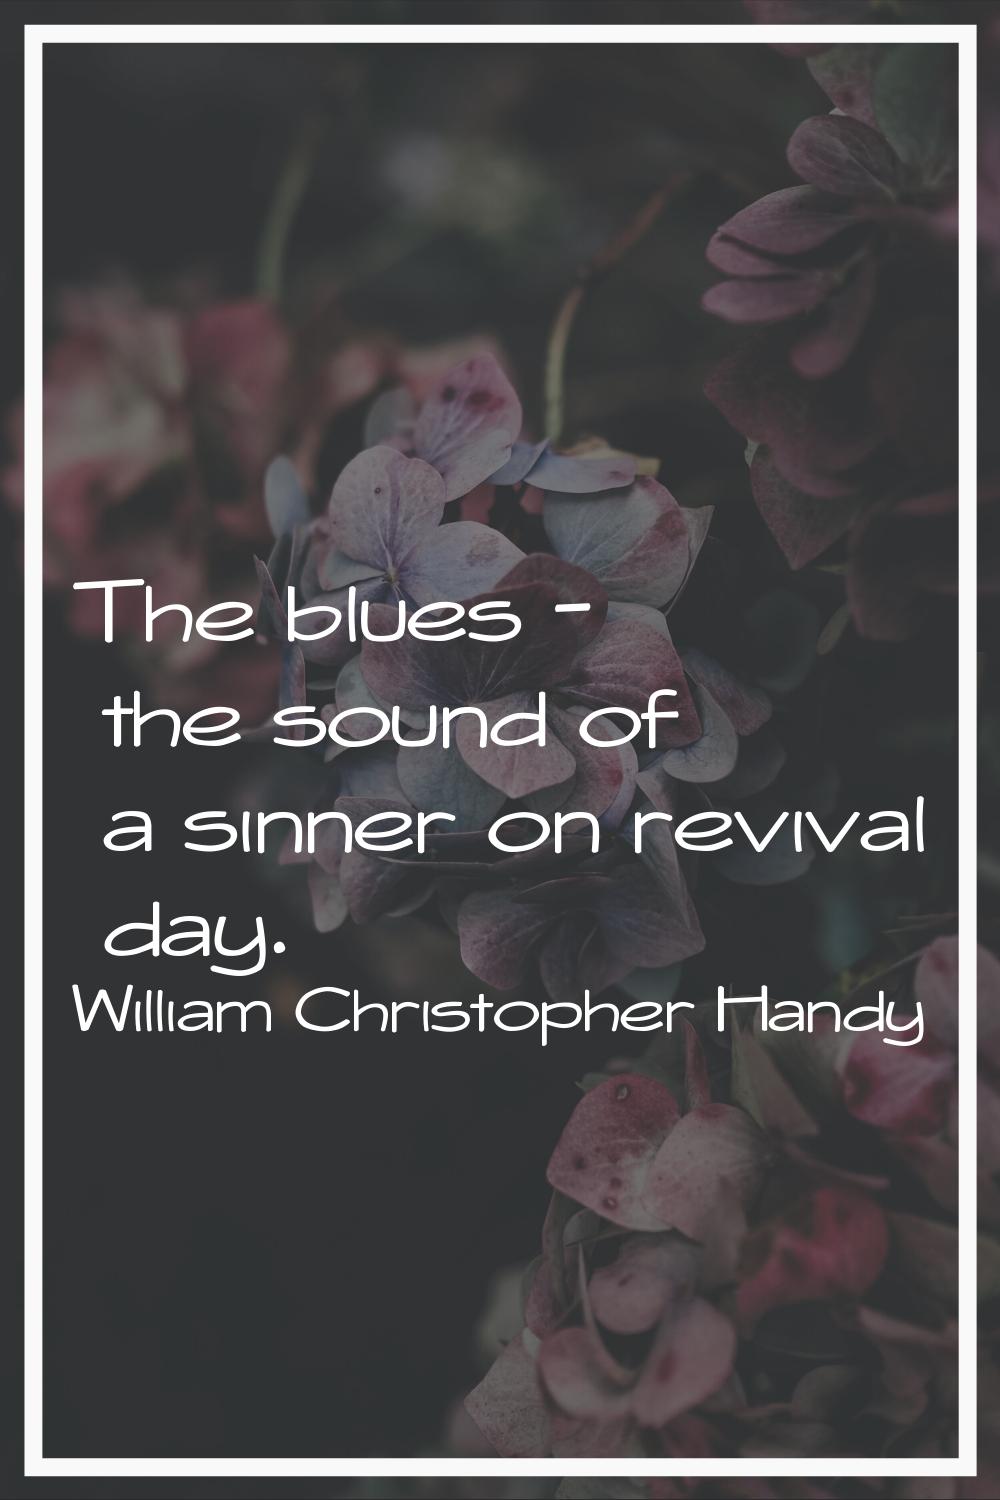 The blues - the sound of a sinner on revival day.